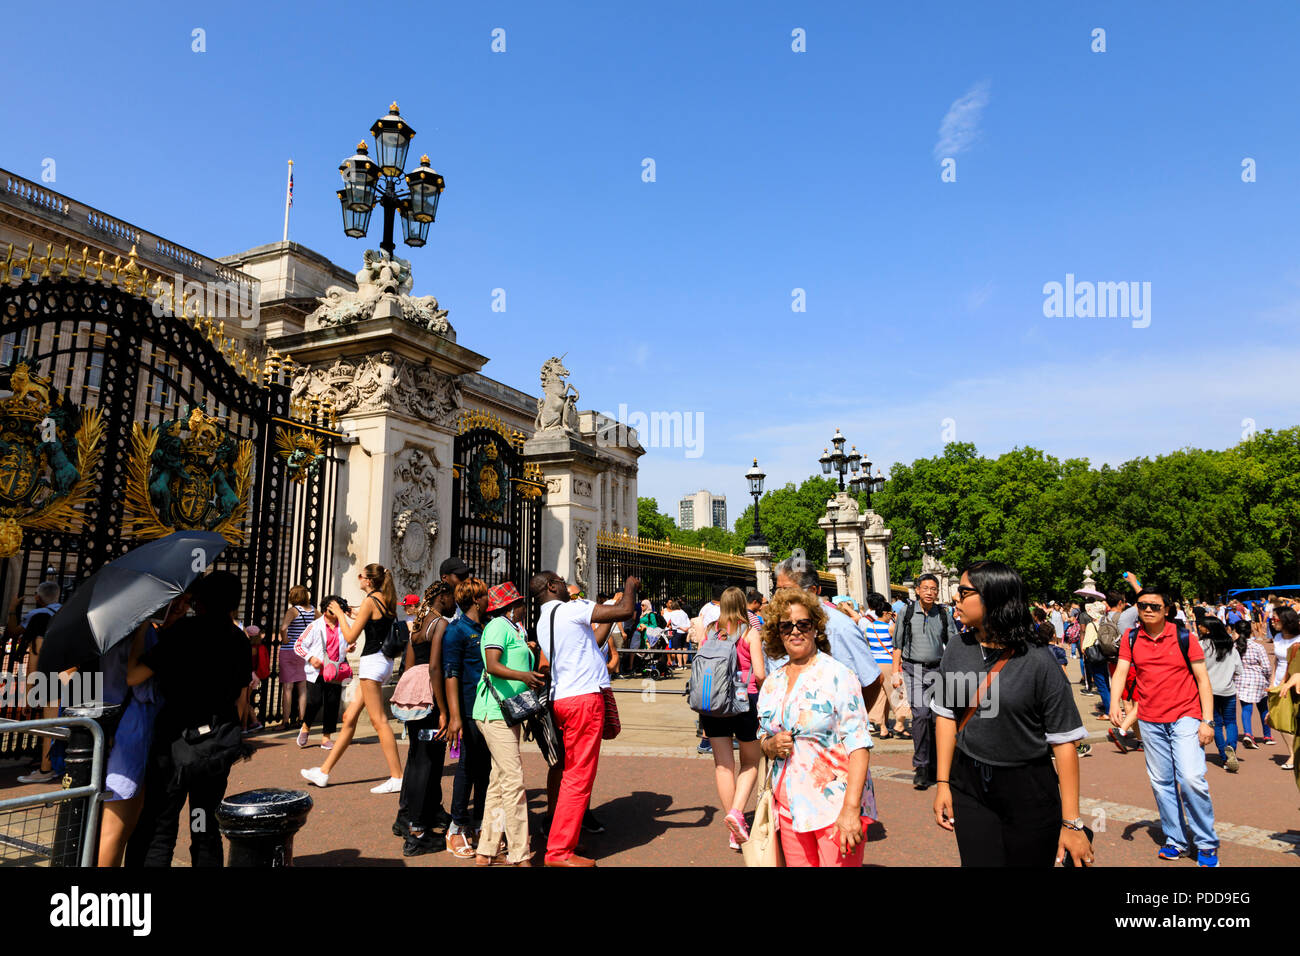 Crowds of tourists outside Her Majesty Queen Elizabeth II royal residence, Buckingham Palace, City of Westminster, London, England Stock Photo